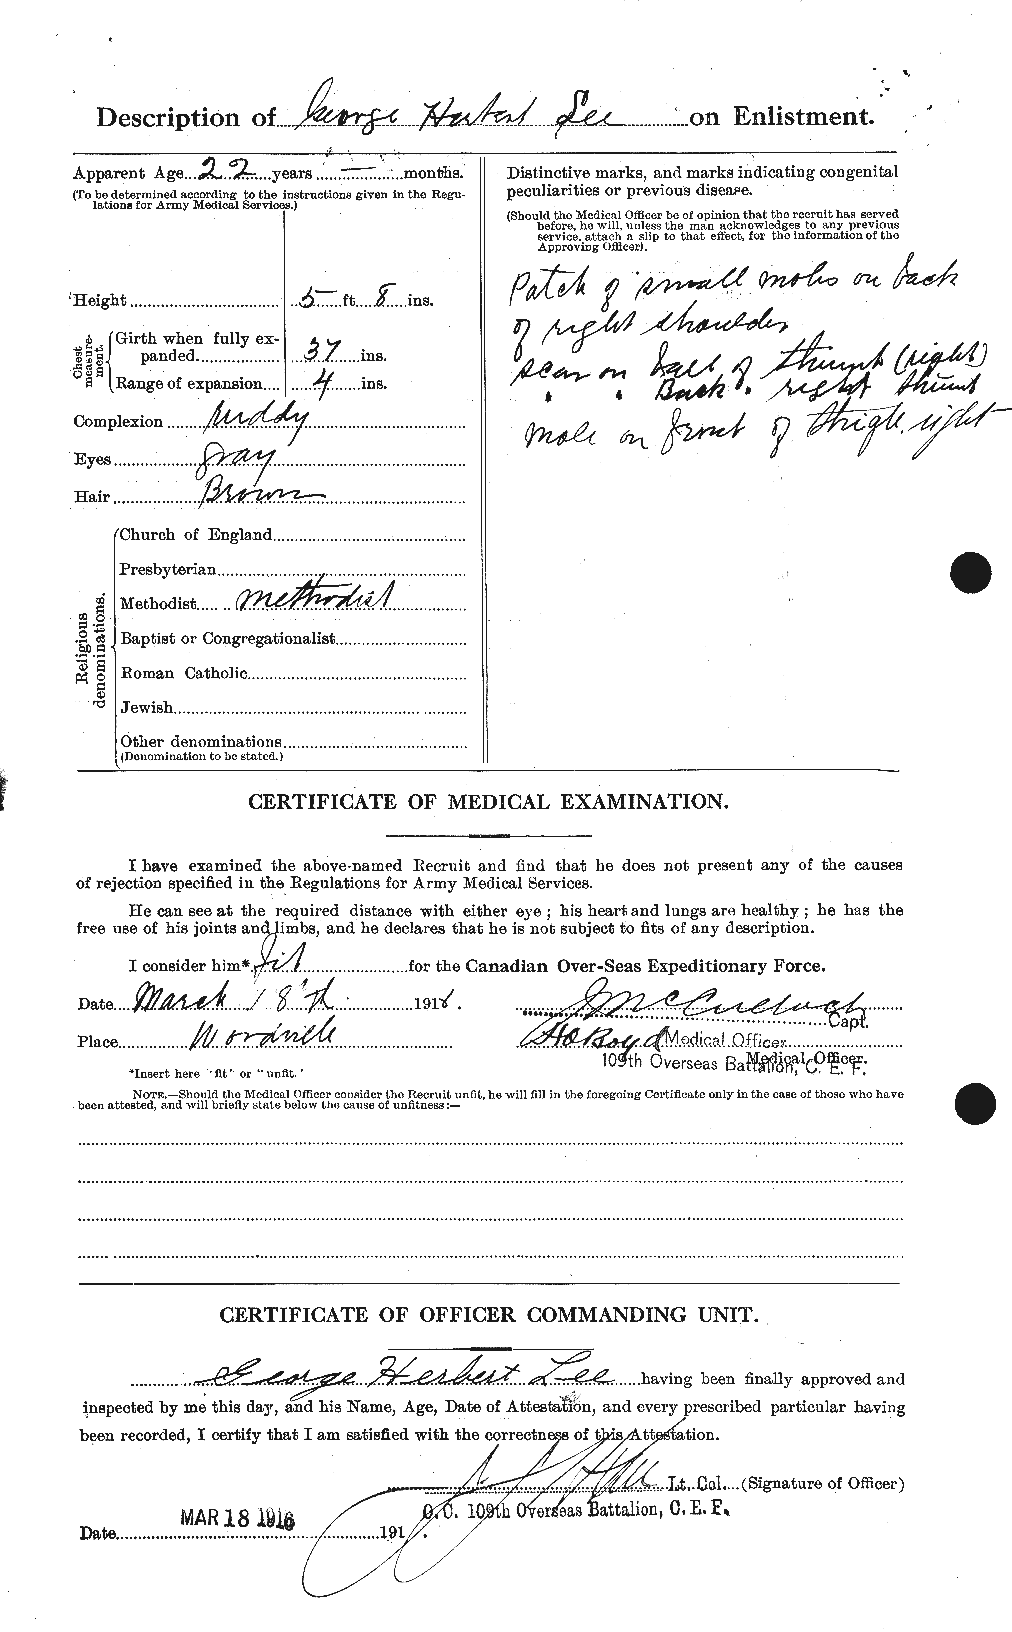 Personnel Records of the First World War - CEF 456796b